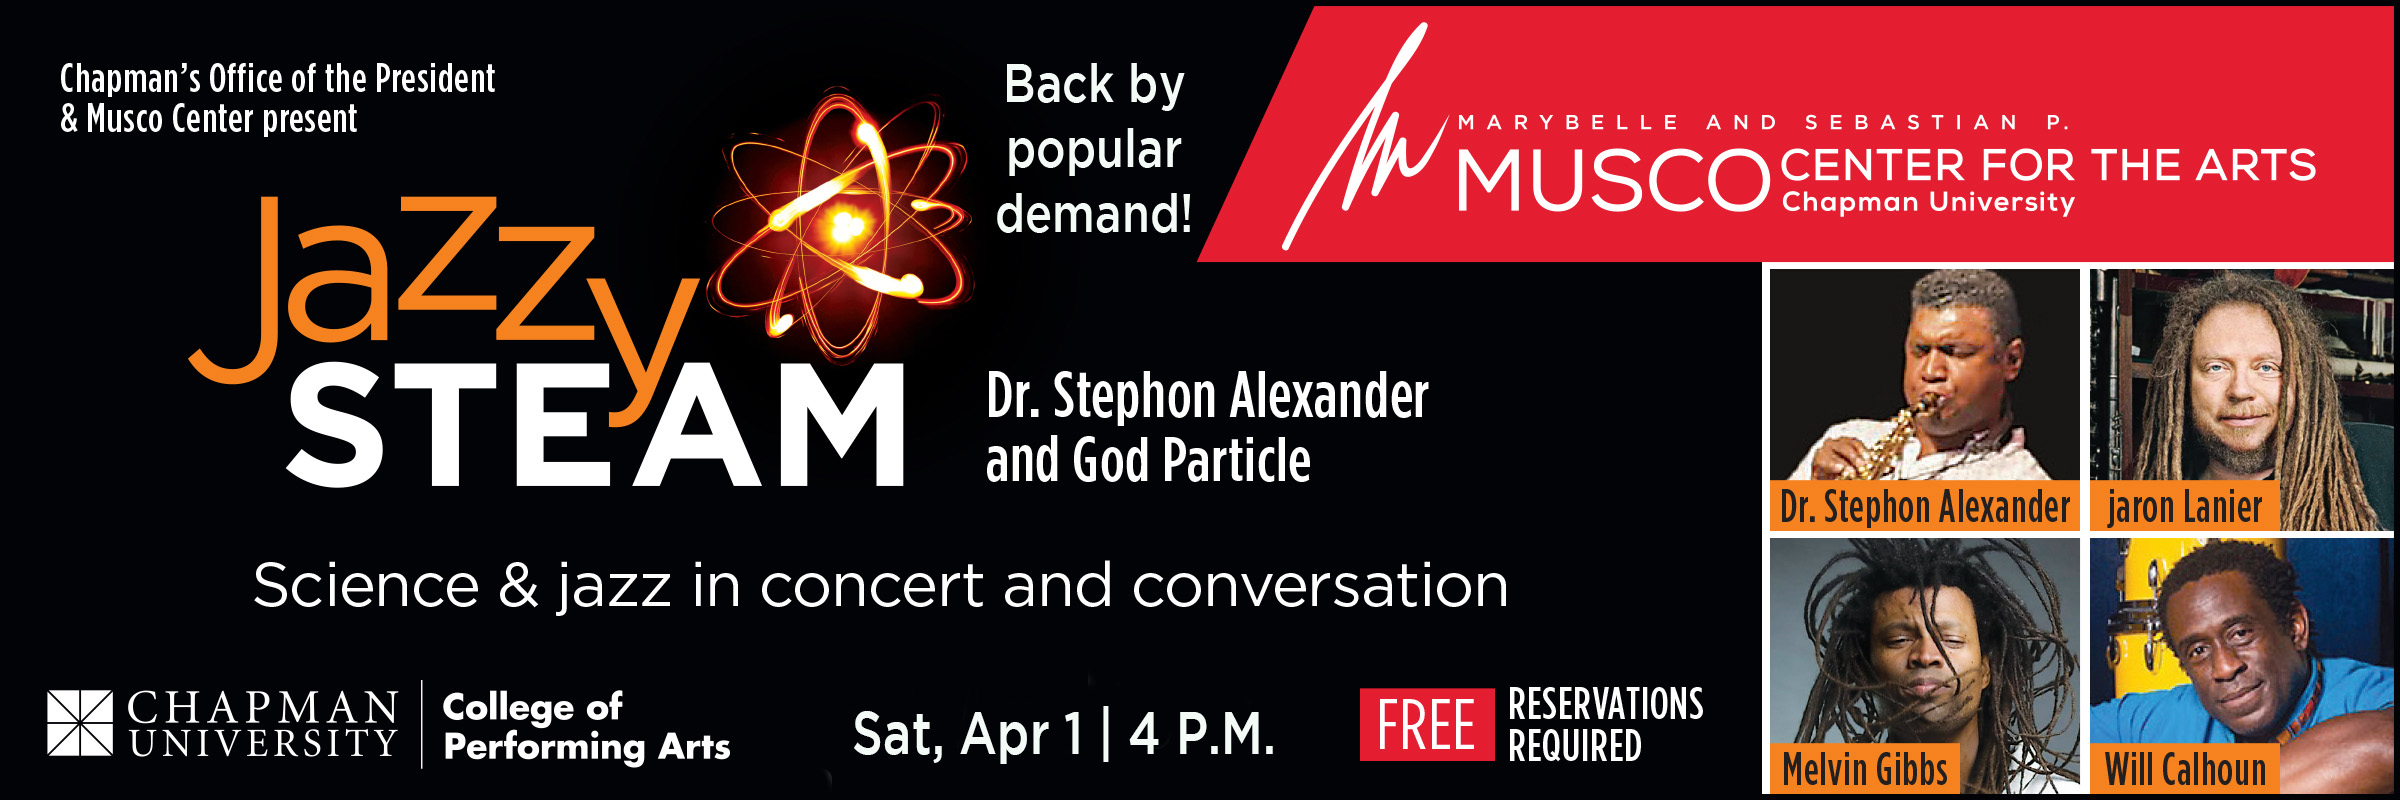 Chapman's Office of the President & Musco Center present Jazzy STEAM. Science & jazz in concert and conversation. Back by popular demand. Dr. Stephon Alexander and God Particle. Marybelle and Sebastian P. Musco Center for the Arts. Pictures of the 4 artists. 